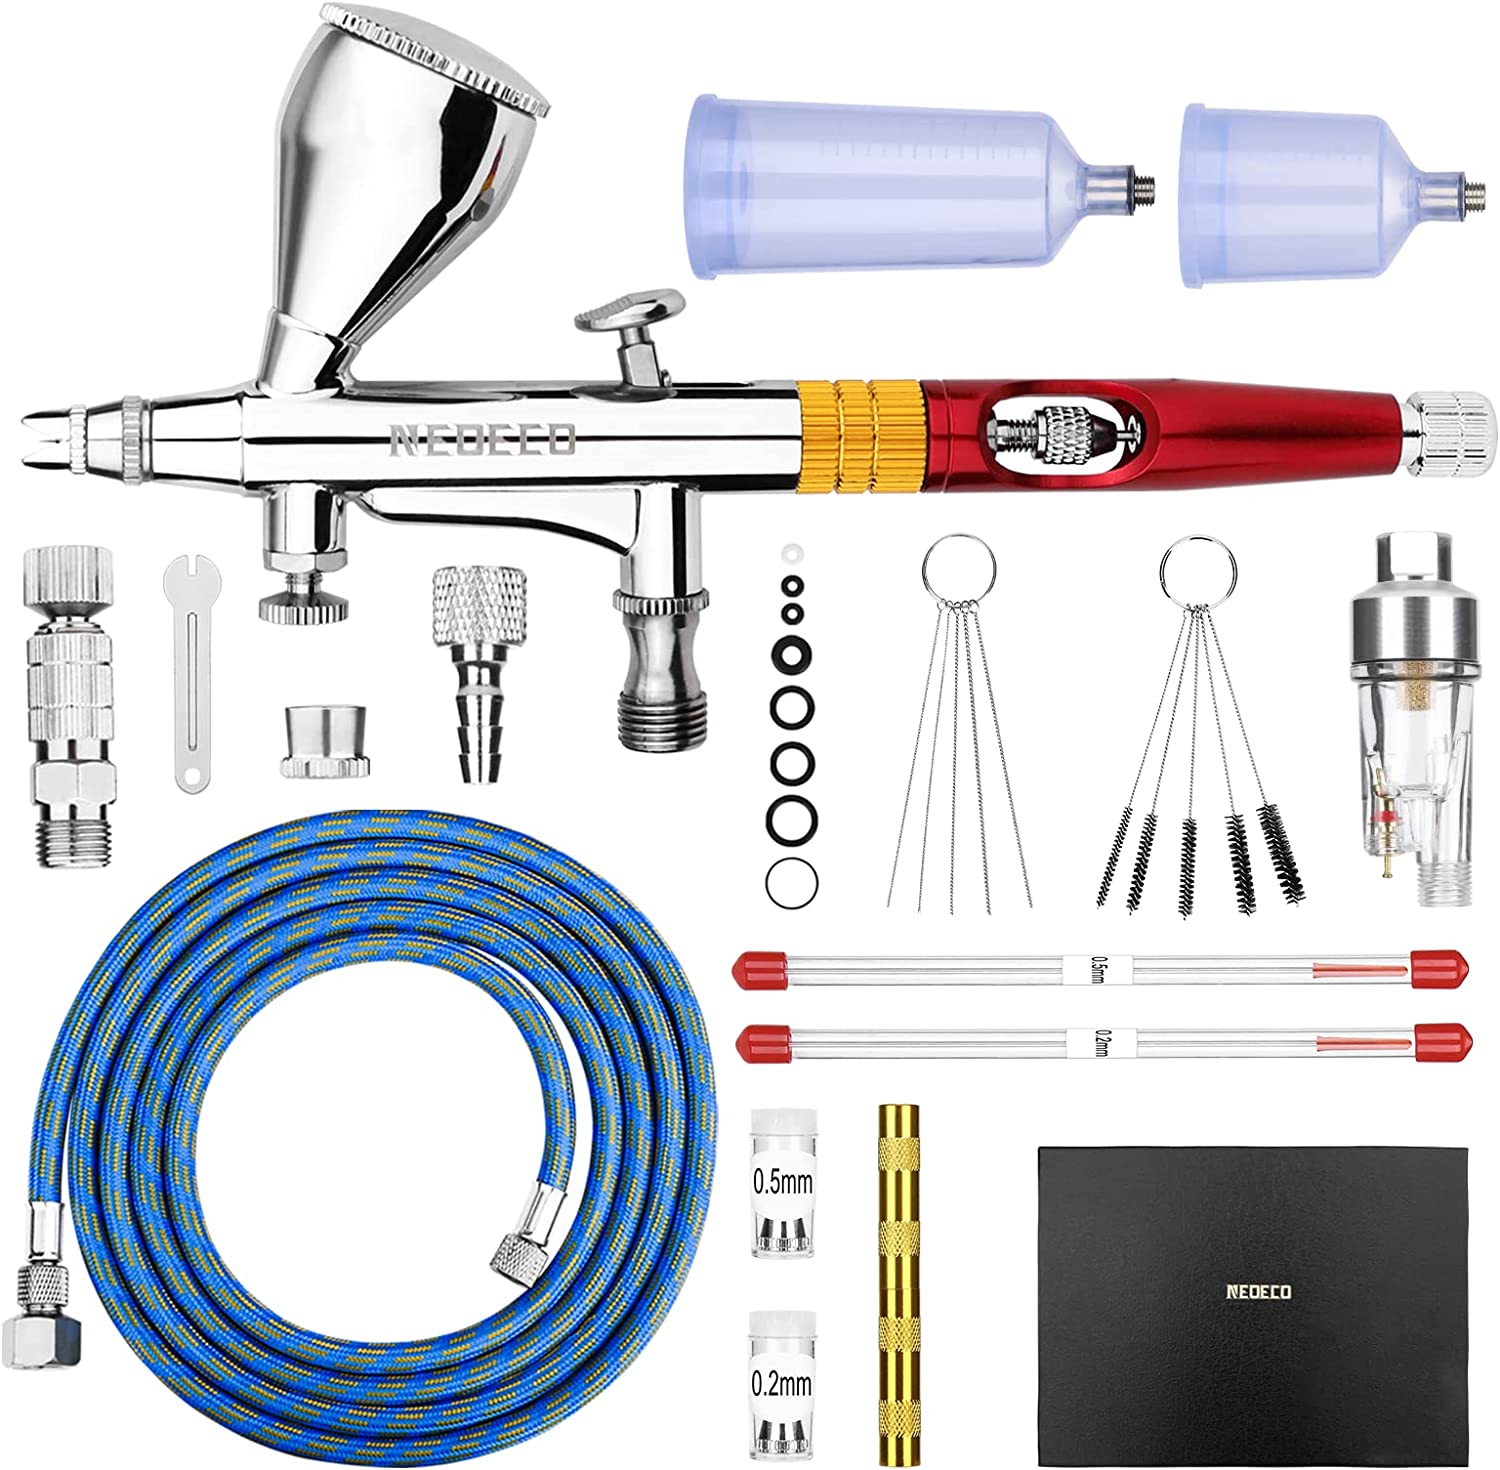 TimberTech ABPST01 Airbrush Kit - Includes Adapter, Hose, Nozzles and Needles